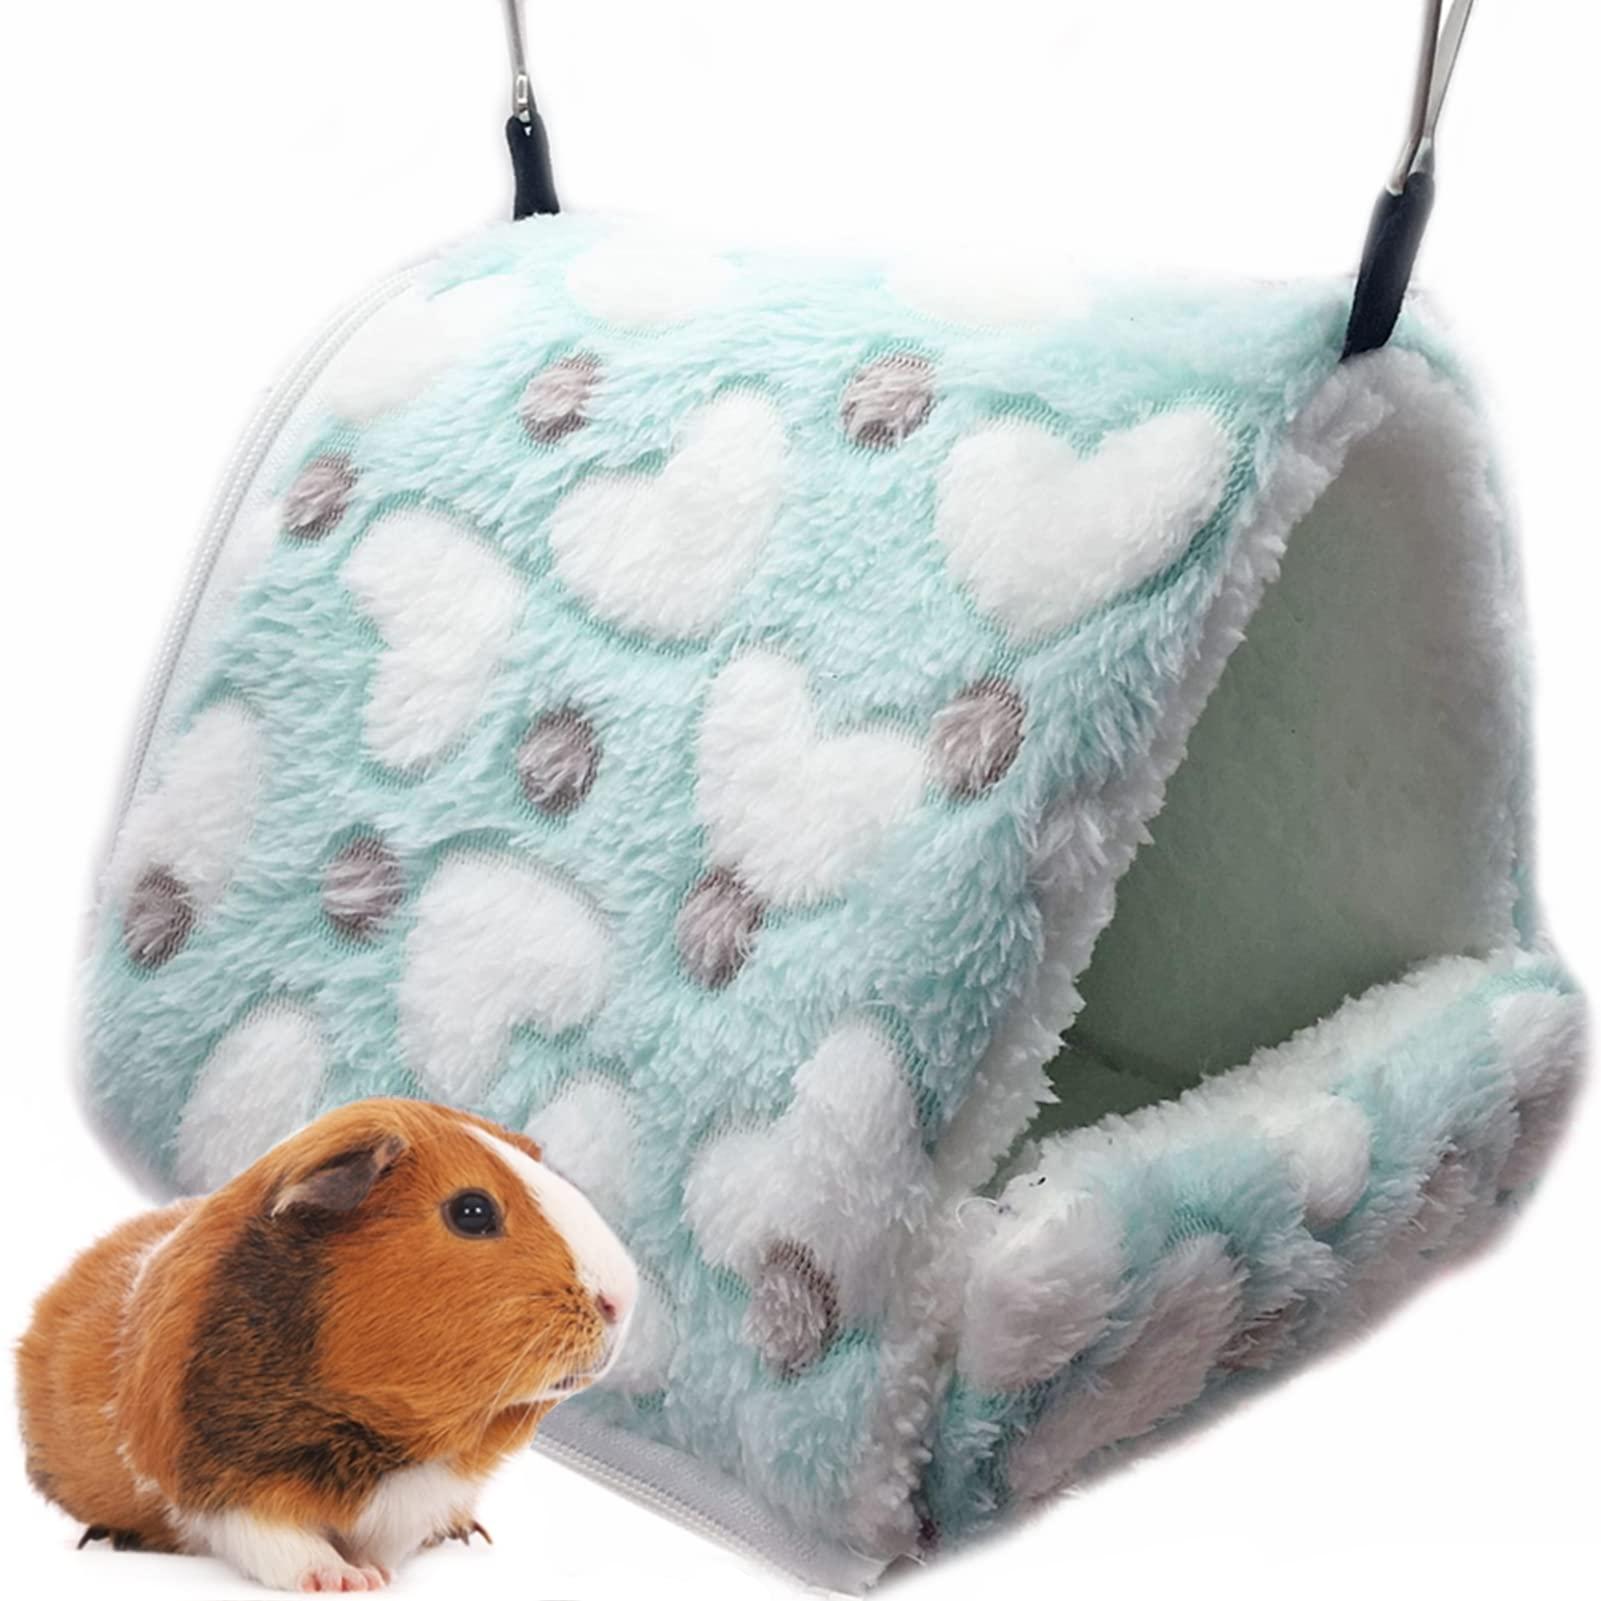 LeerKing Rat Hammock Bed Ferret Rodent Hammock Bed Hideout cage Accessories Toy Bed for guinea Pig chinchilla Hedgehog Sugar glider